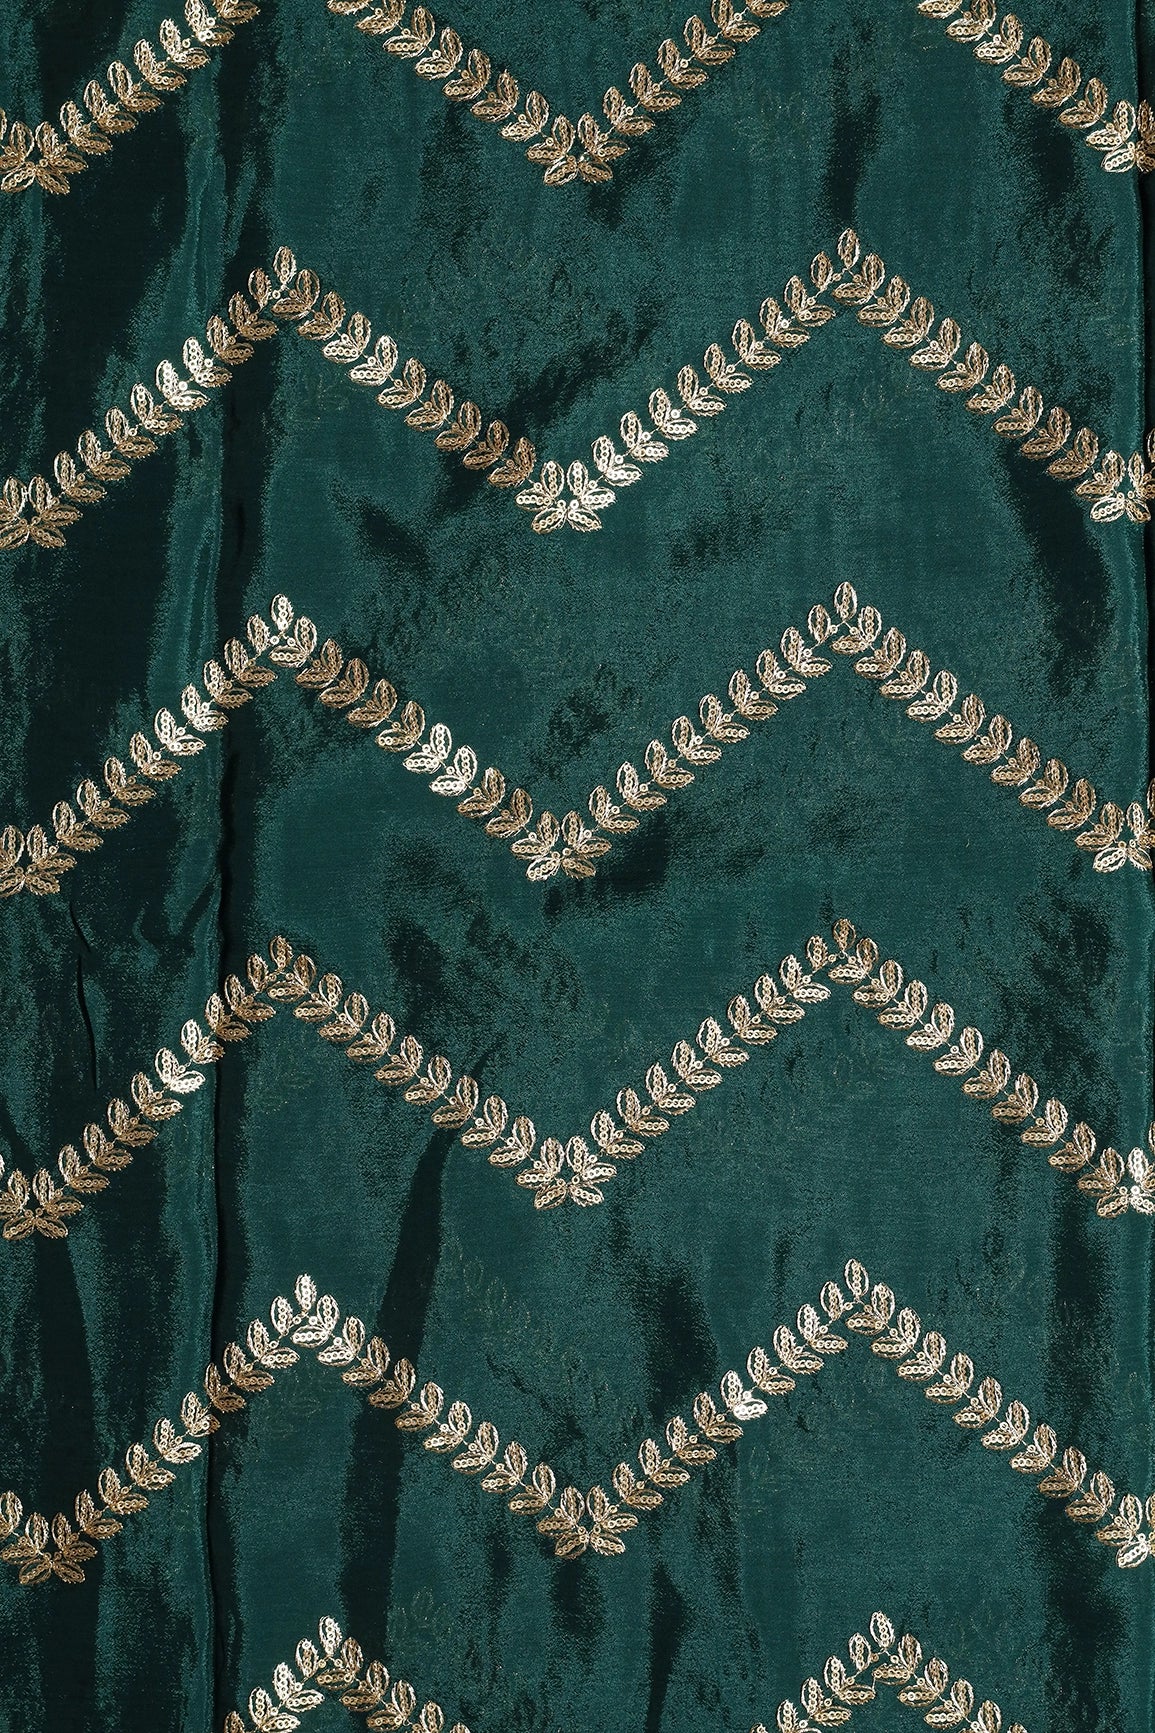 Gold Zari With Gold Sequins Chevron Embroidery Work On Bottle Green Chinnon Chiffon Fabric